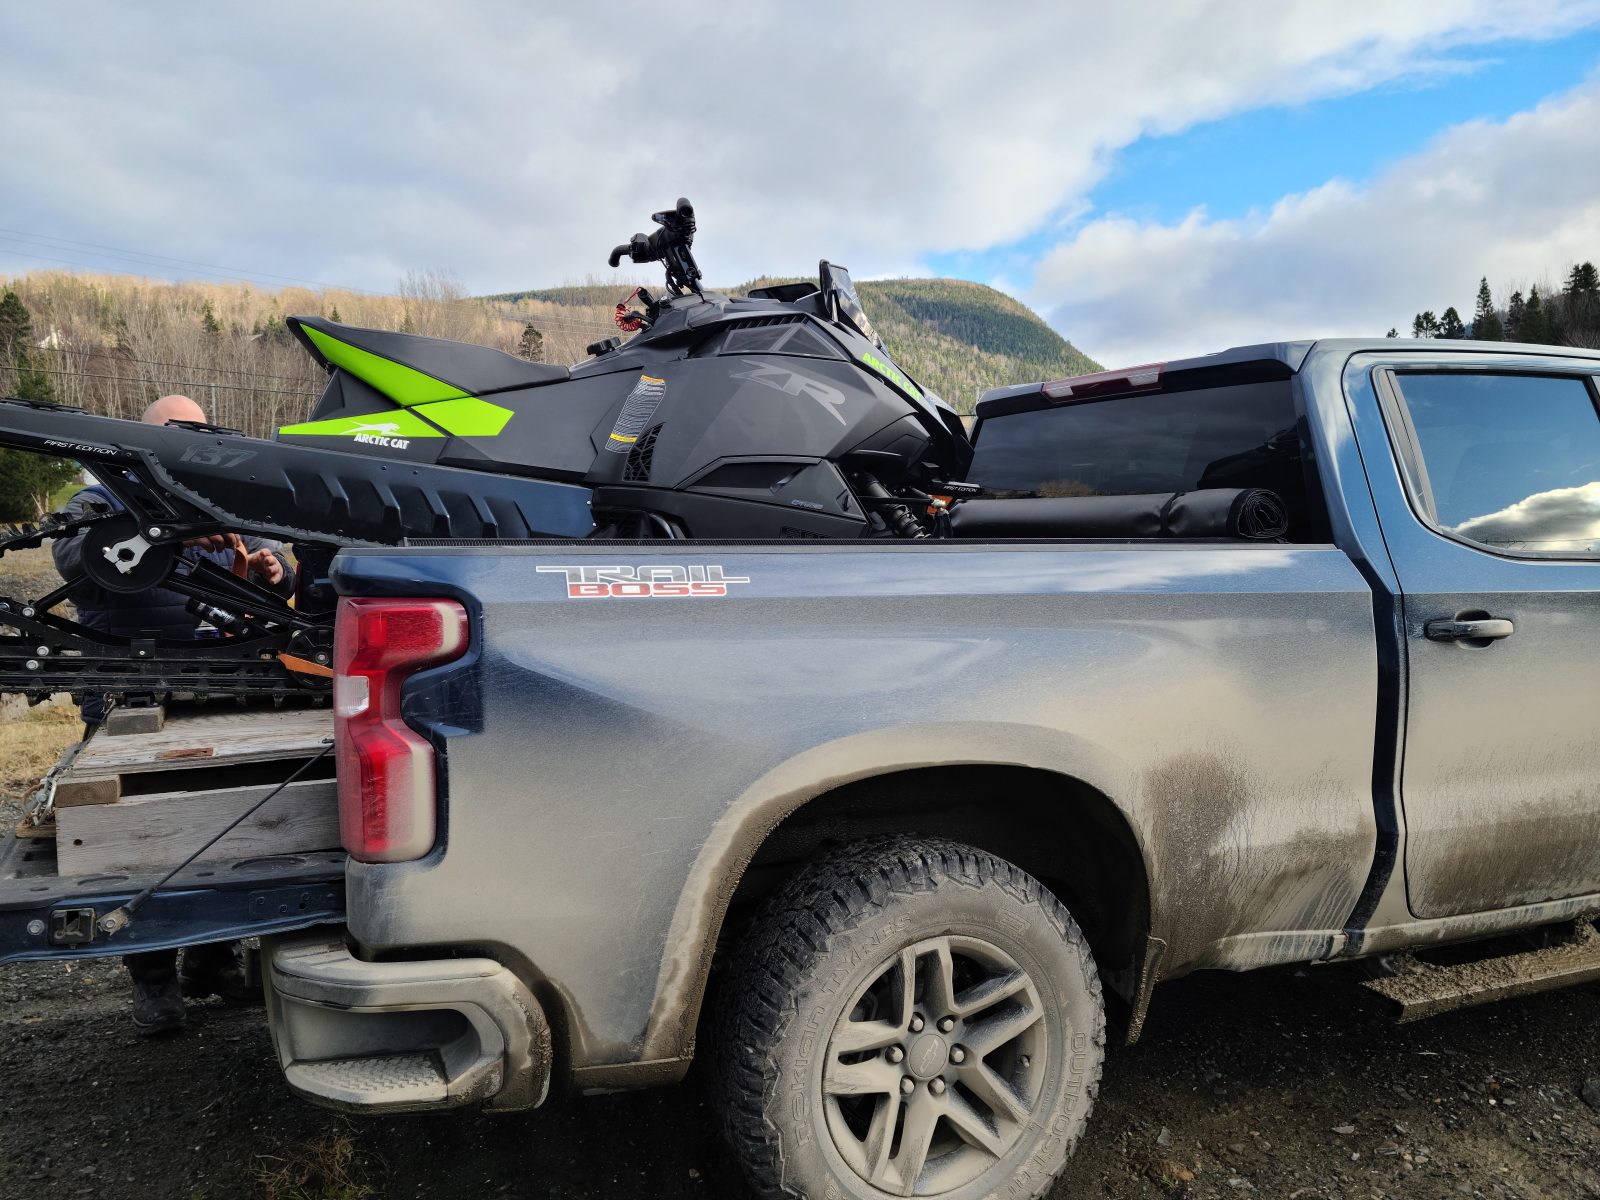 2024 zr 600 catalyst sled in the trunk of a pickup truck